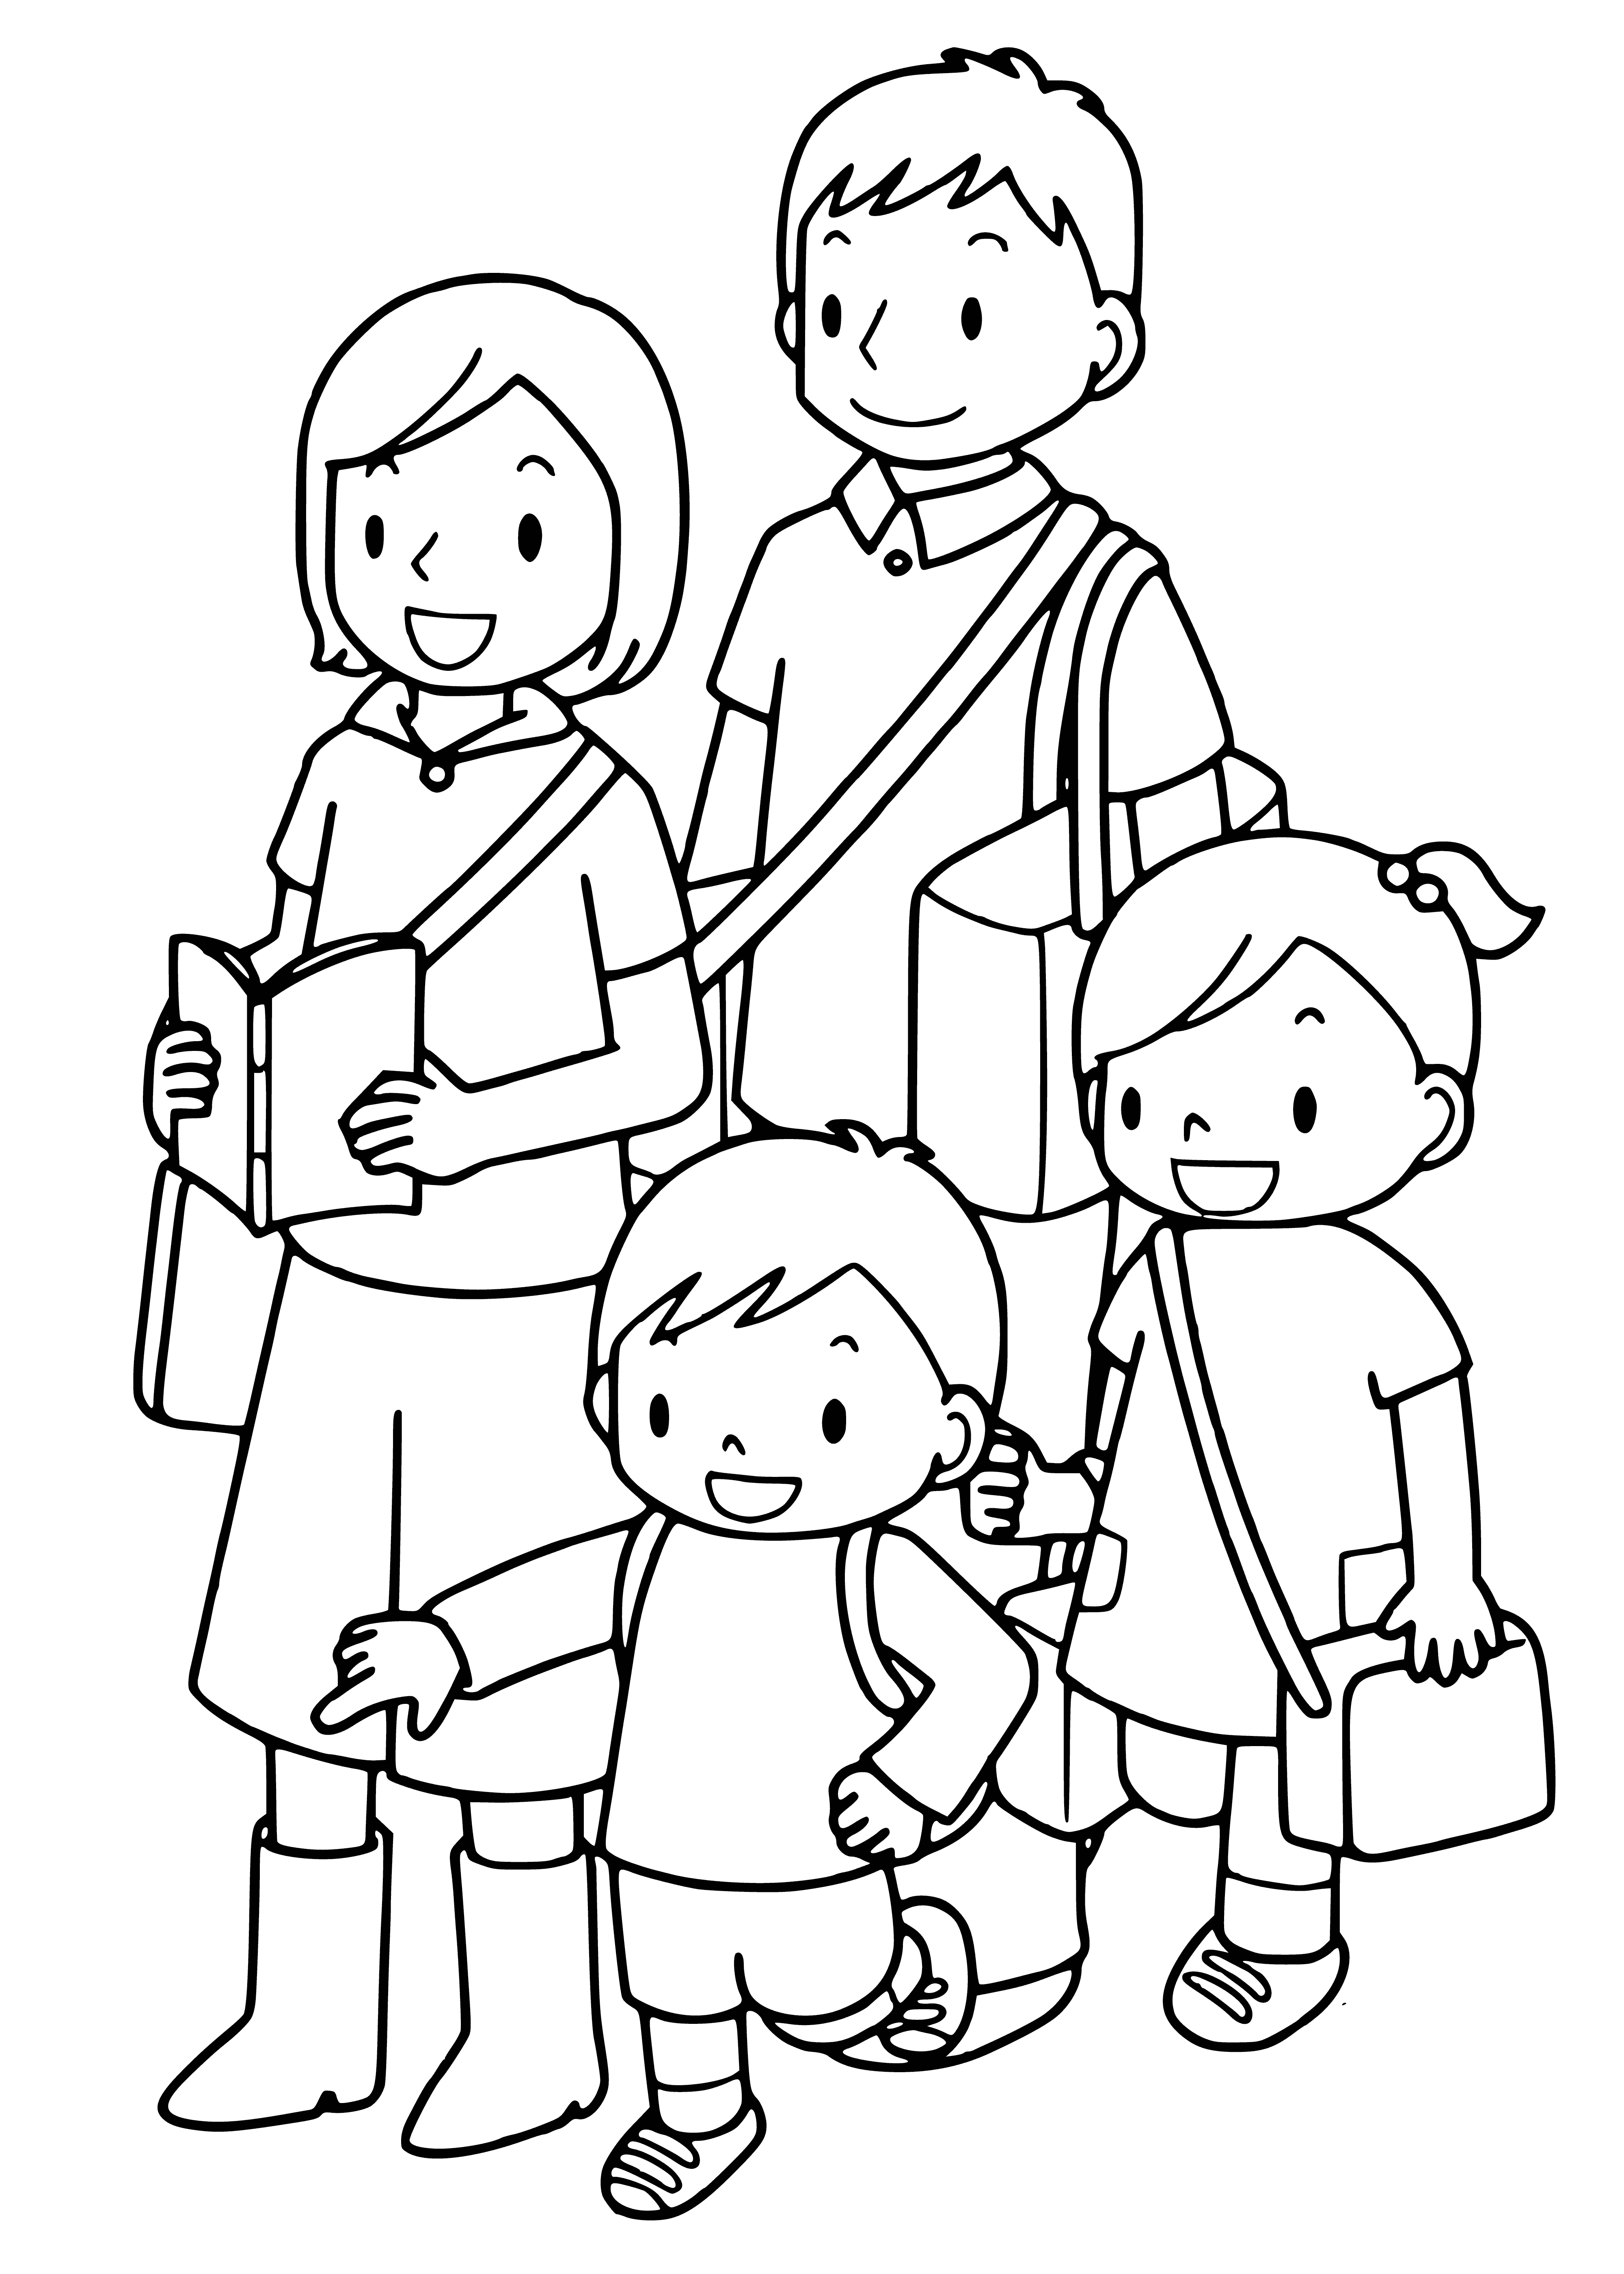 Family 4 people coloring page